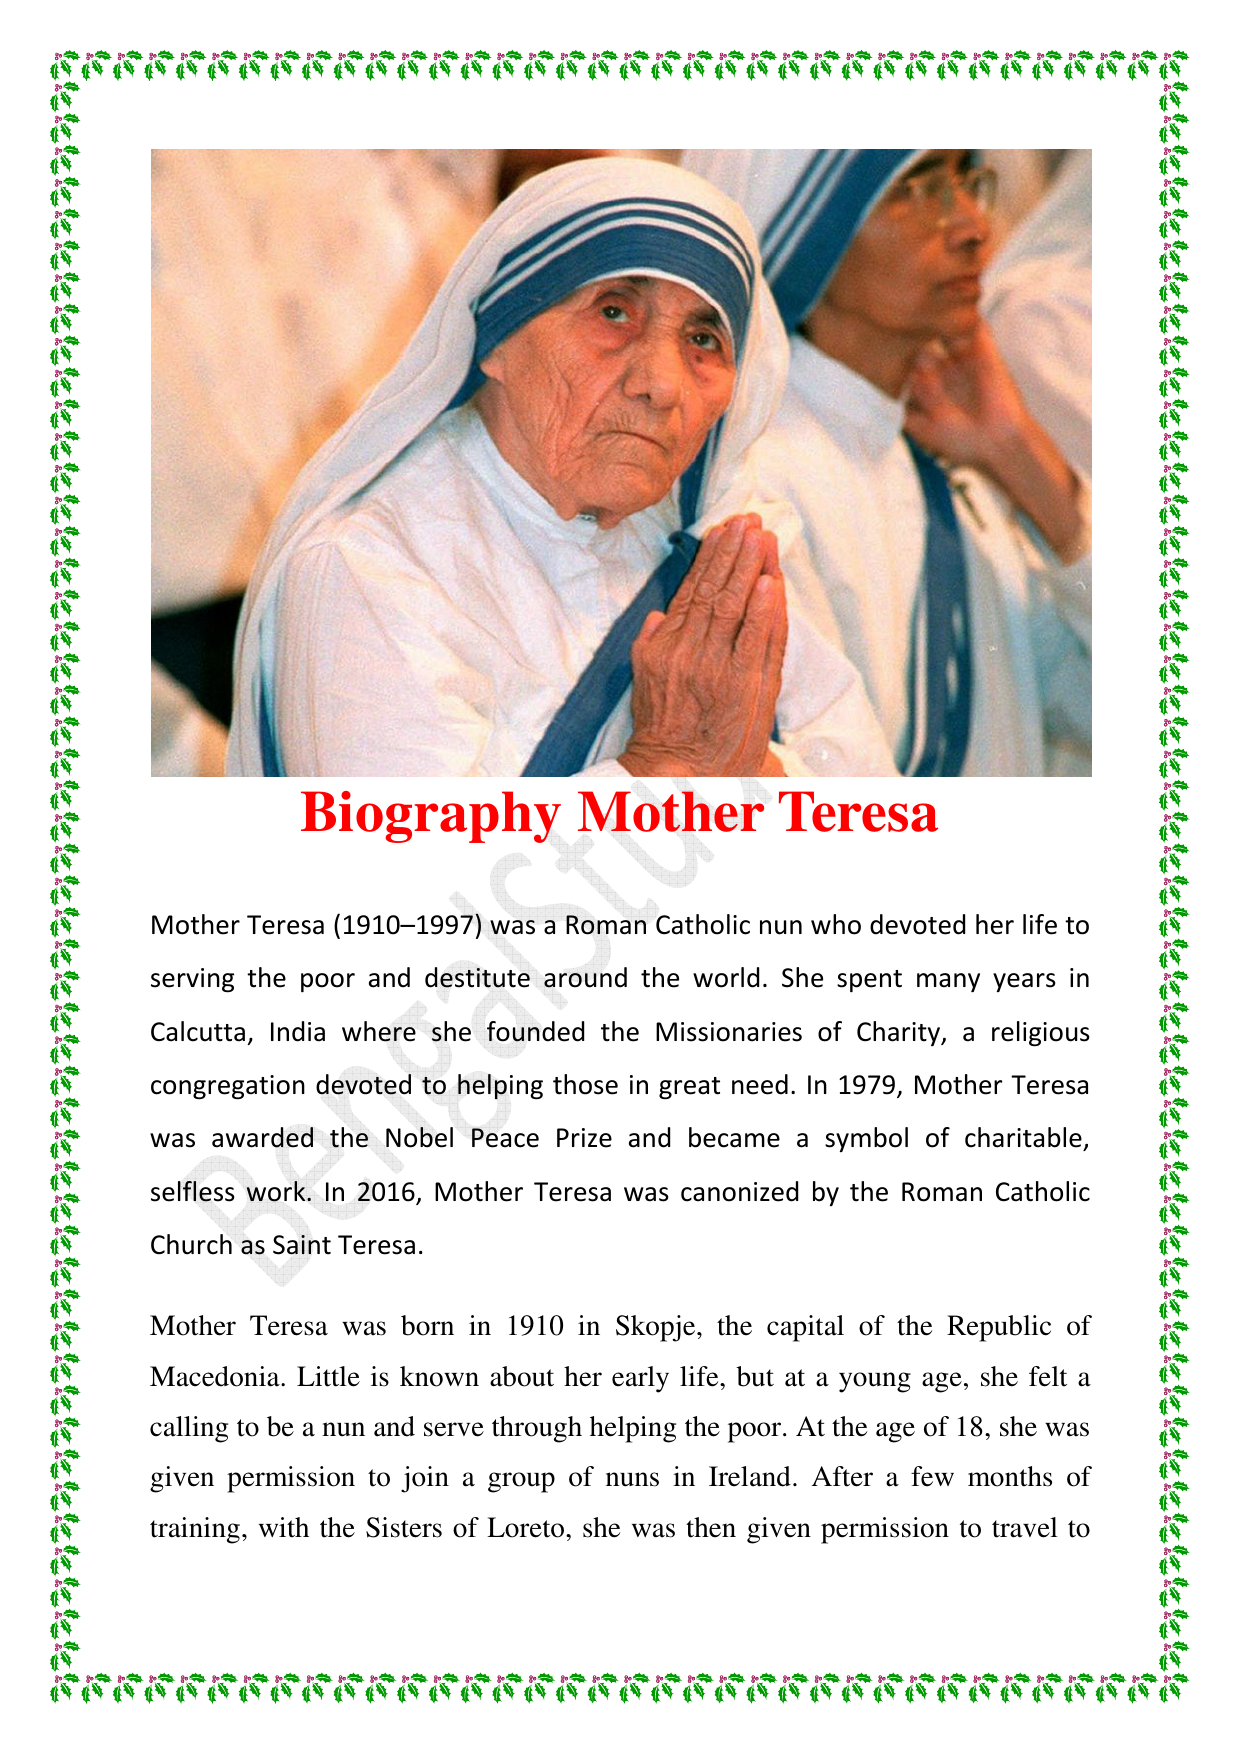 how to write biography sketch on mother